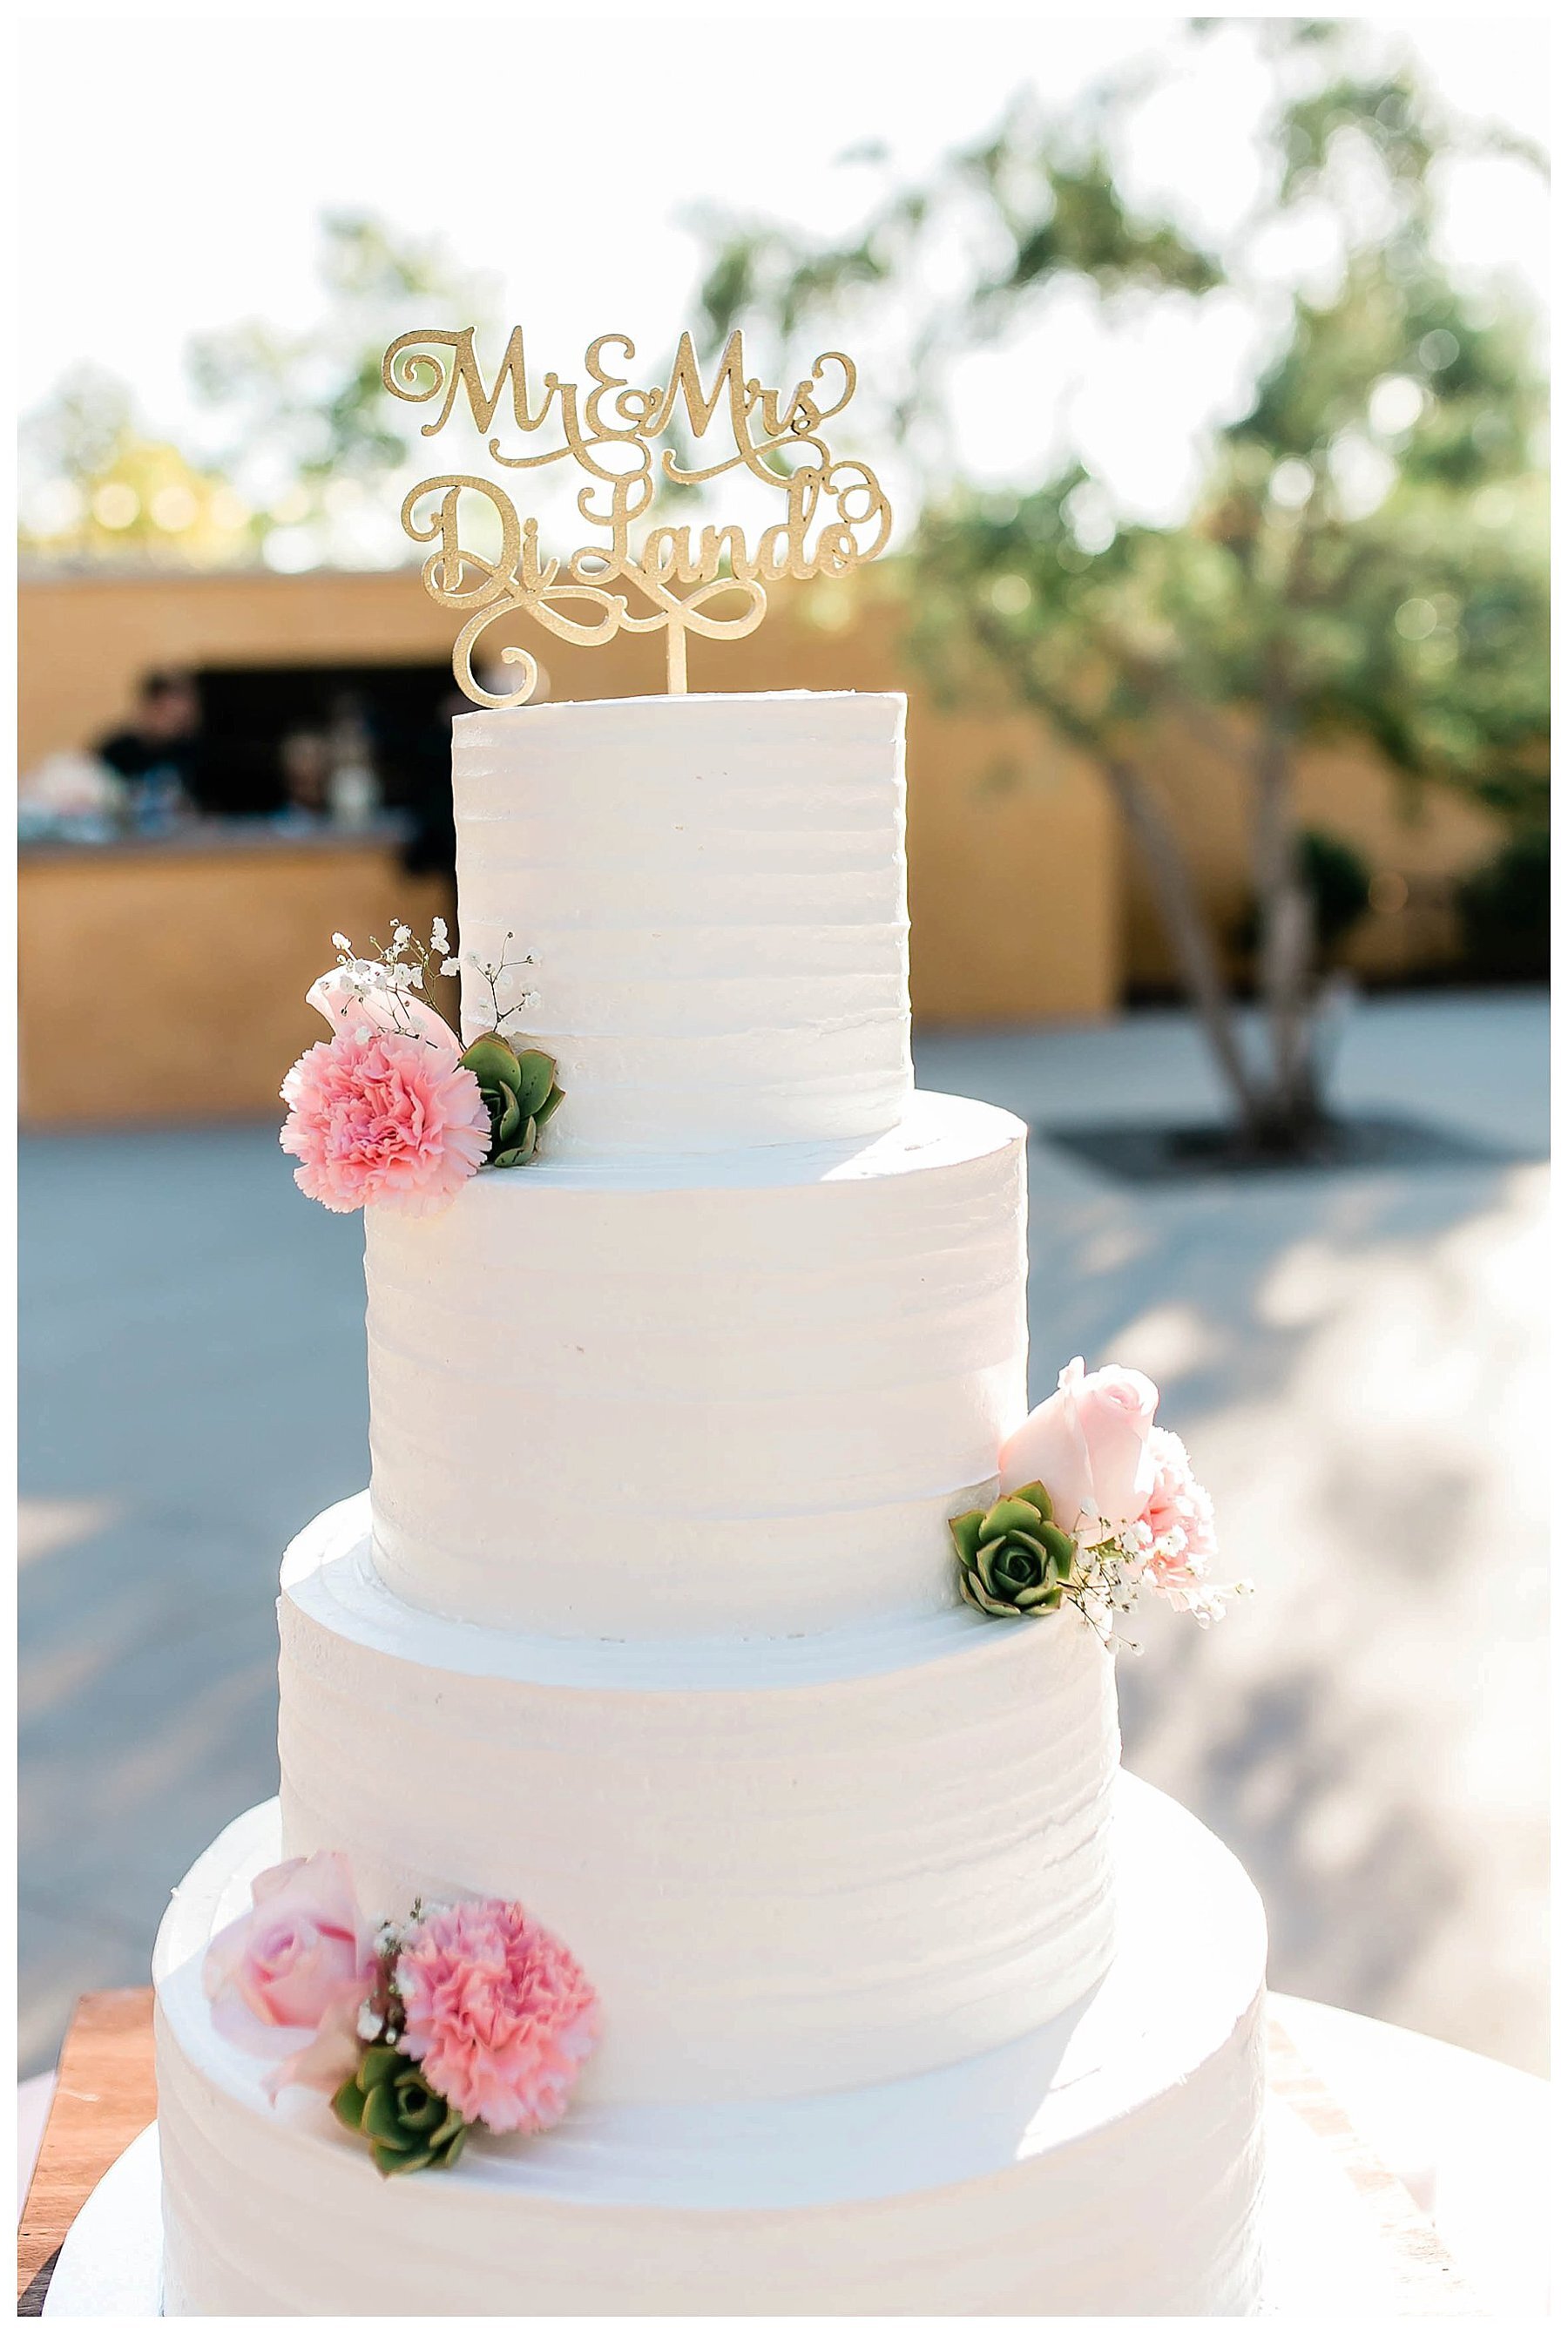  wedding cake with pink flowers on the cake 